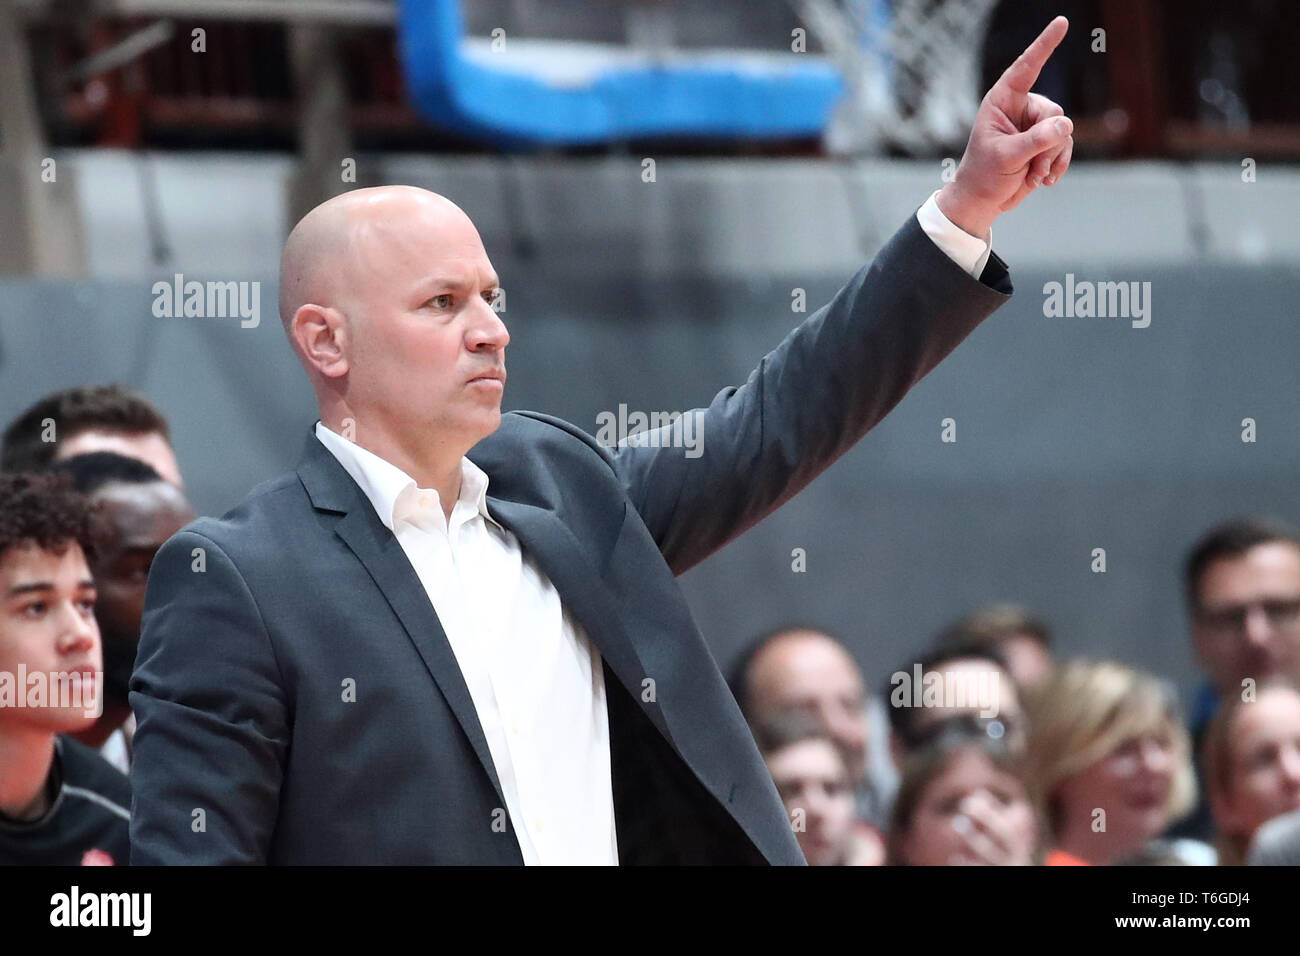 01 May 2019, Bavaria, Würzburg: Basketball: Europe Cup, s.Oliver Würzburg - Dinamo Sassari, knockout round, finals, second legs, in the s.Oliver Arena. The Würzburg coach Denis Wucherer gestures on the edge of the field. Photo: Daniel Karmann/dpa Stock Photo